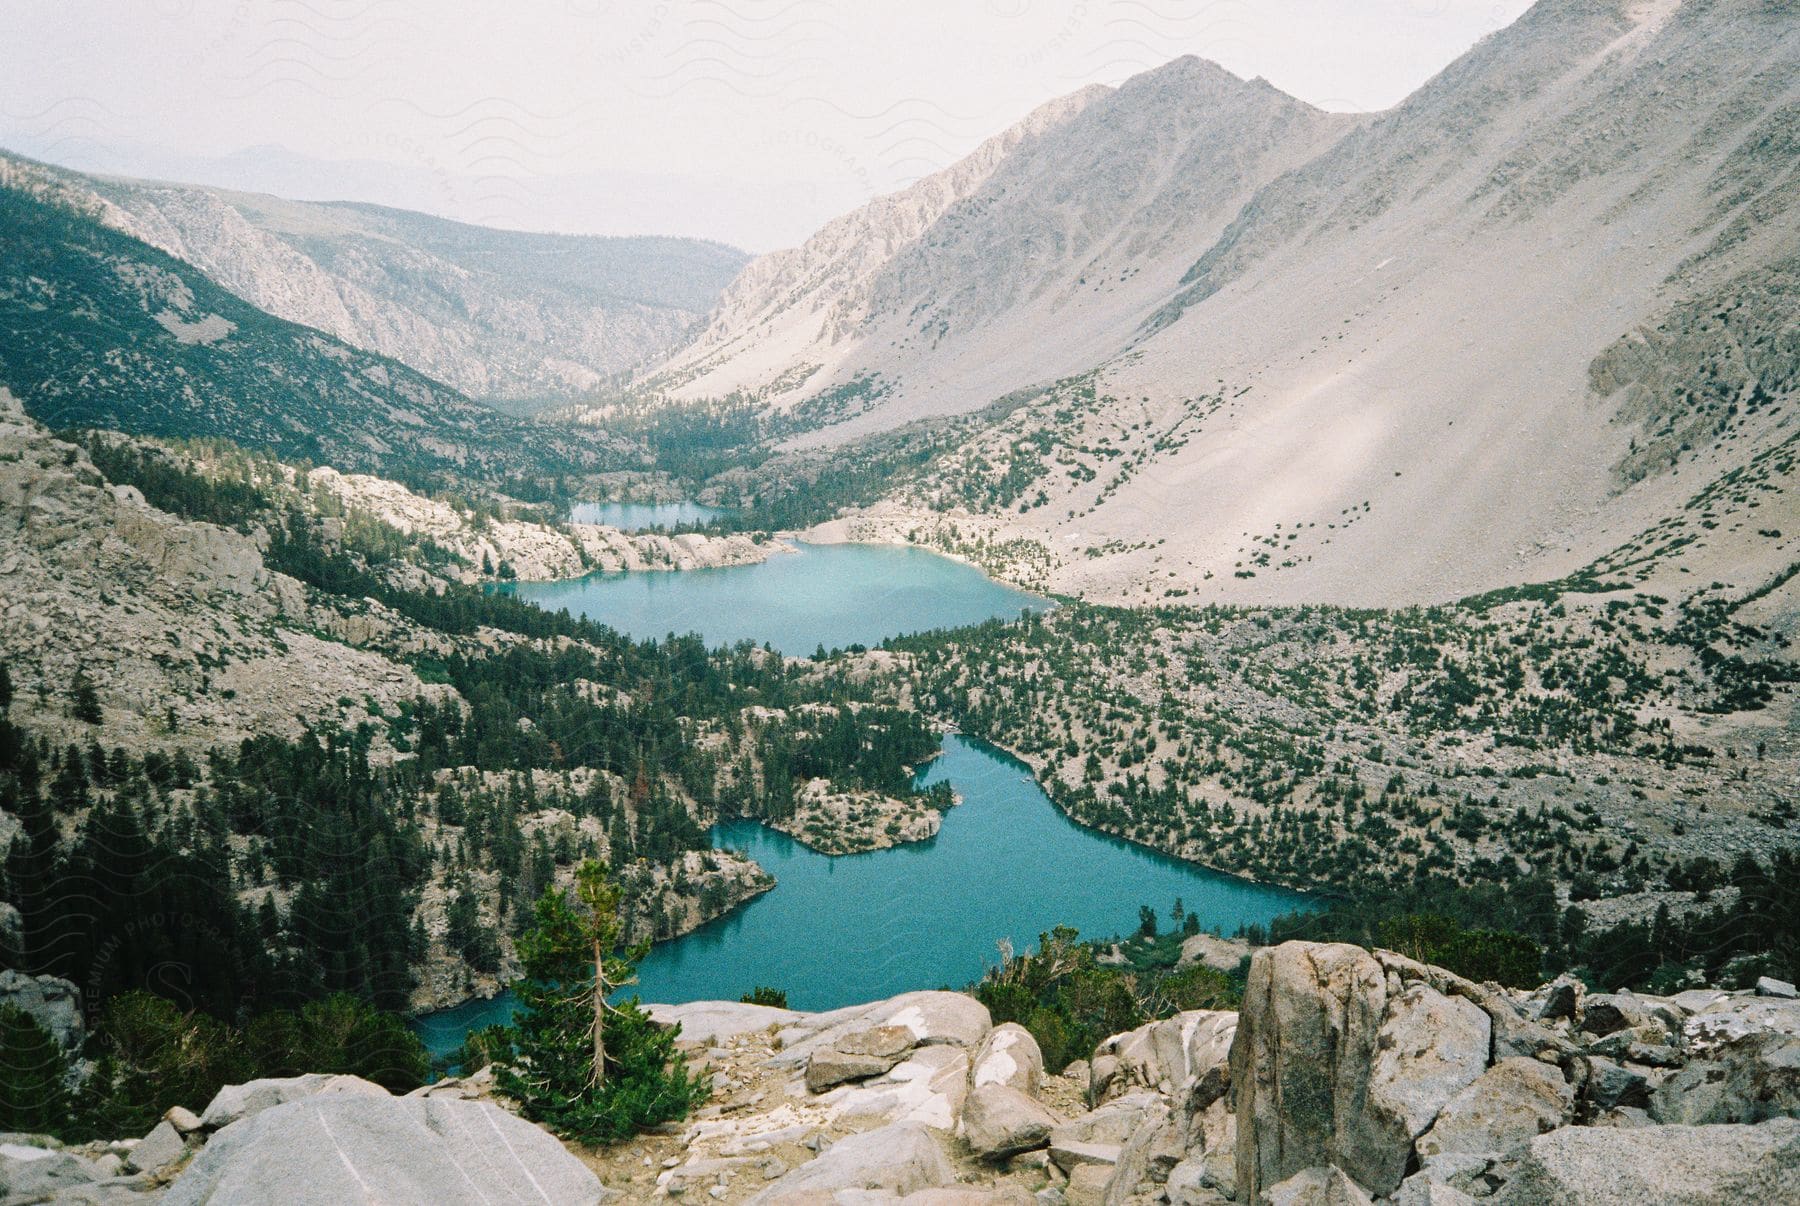 Aerial view of pine trees surrounding small bodies of water in a valley between large mountains in california